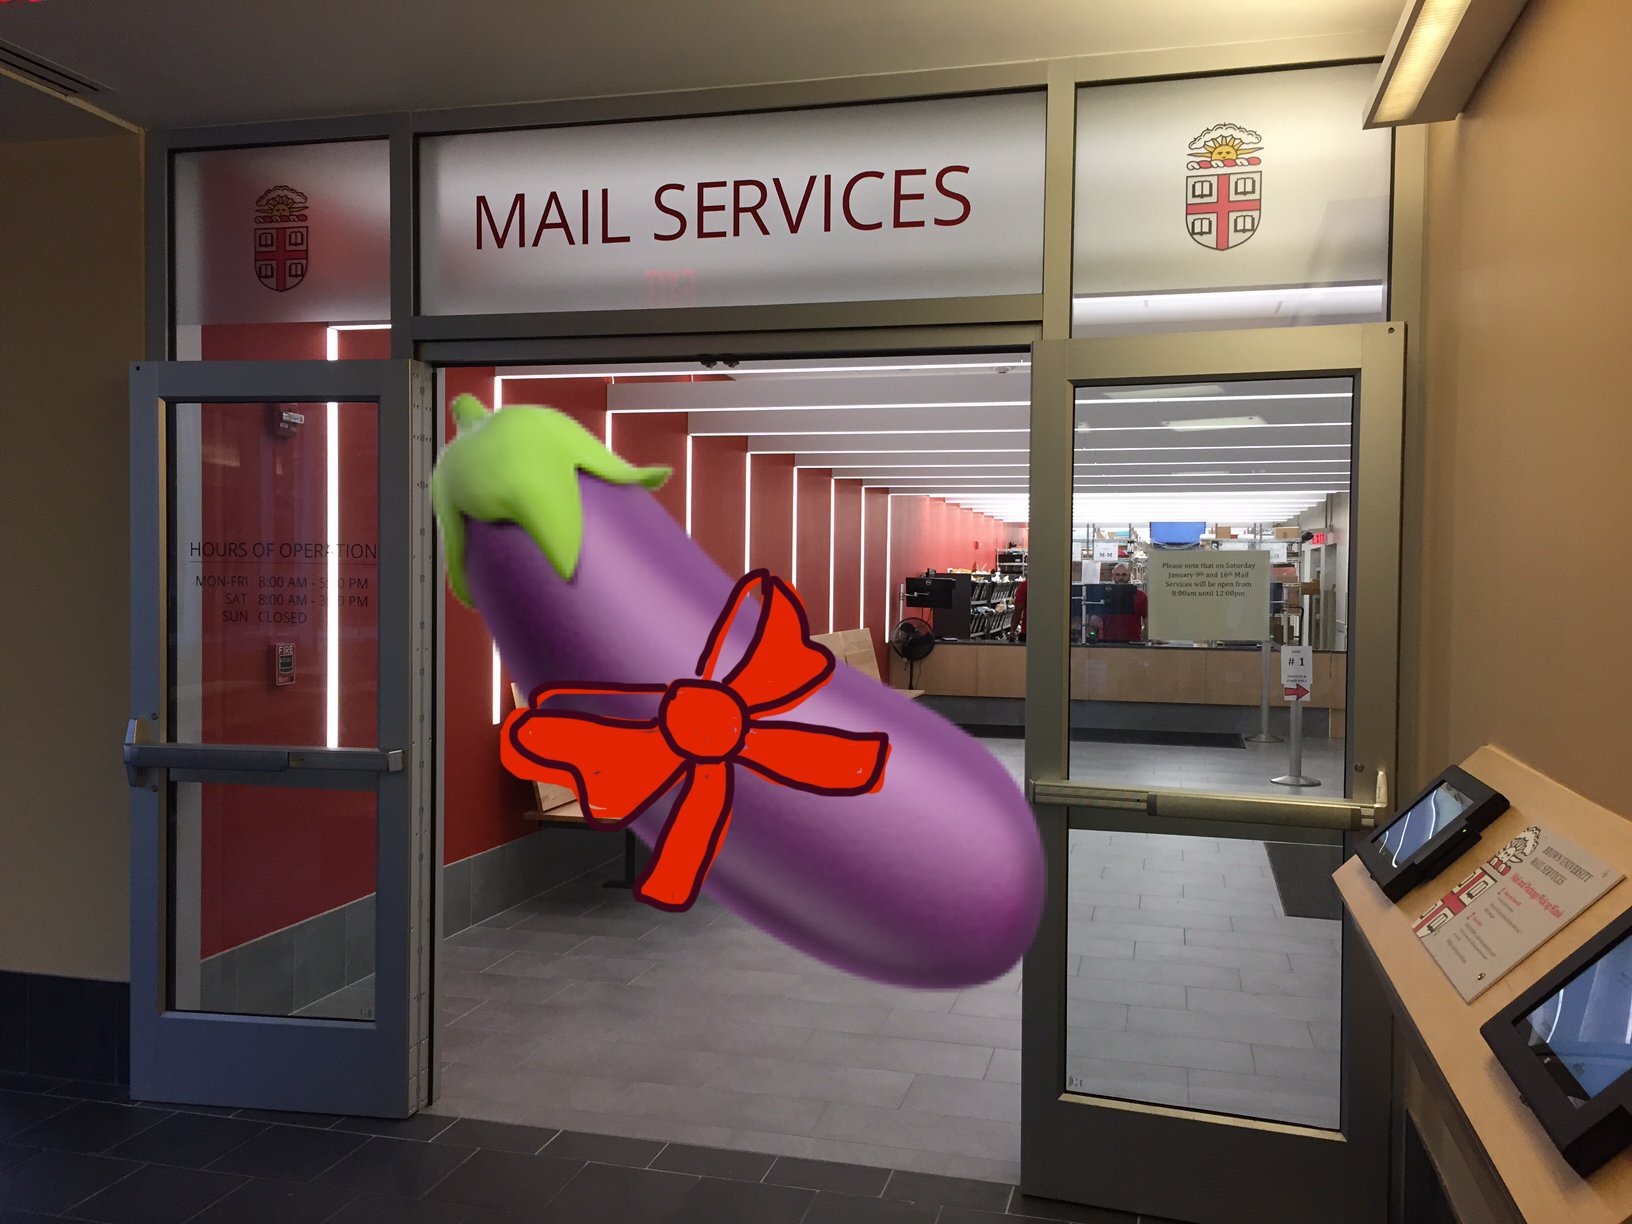 Campus buzz: Hypothetically, if everyone found out you ordered a sex toy to the mailroom, WWYD?